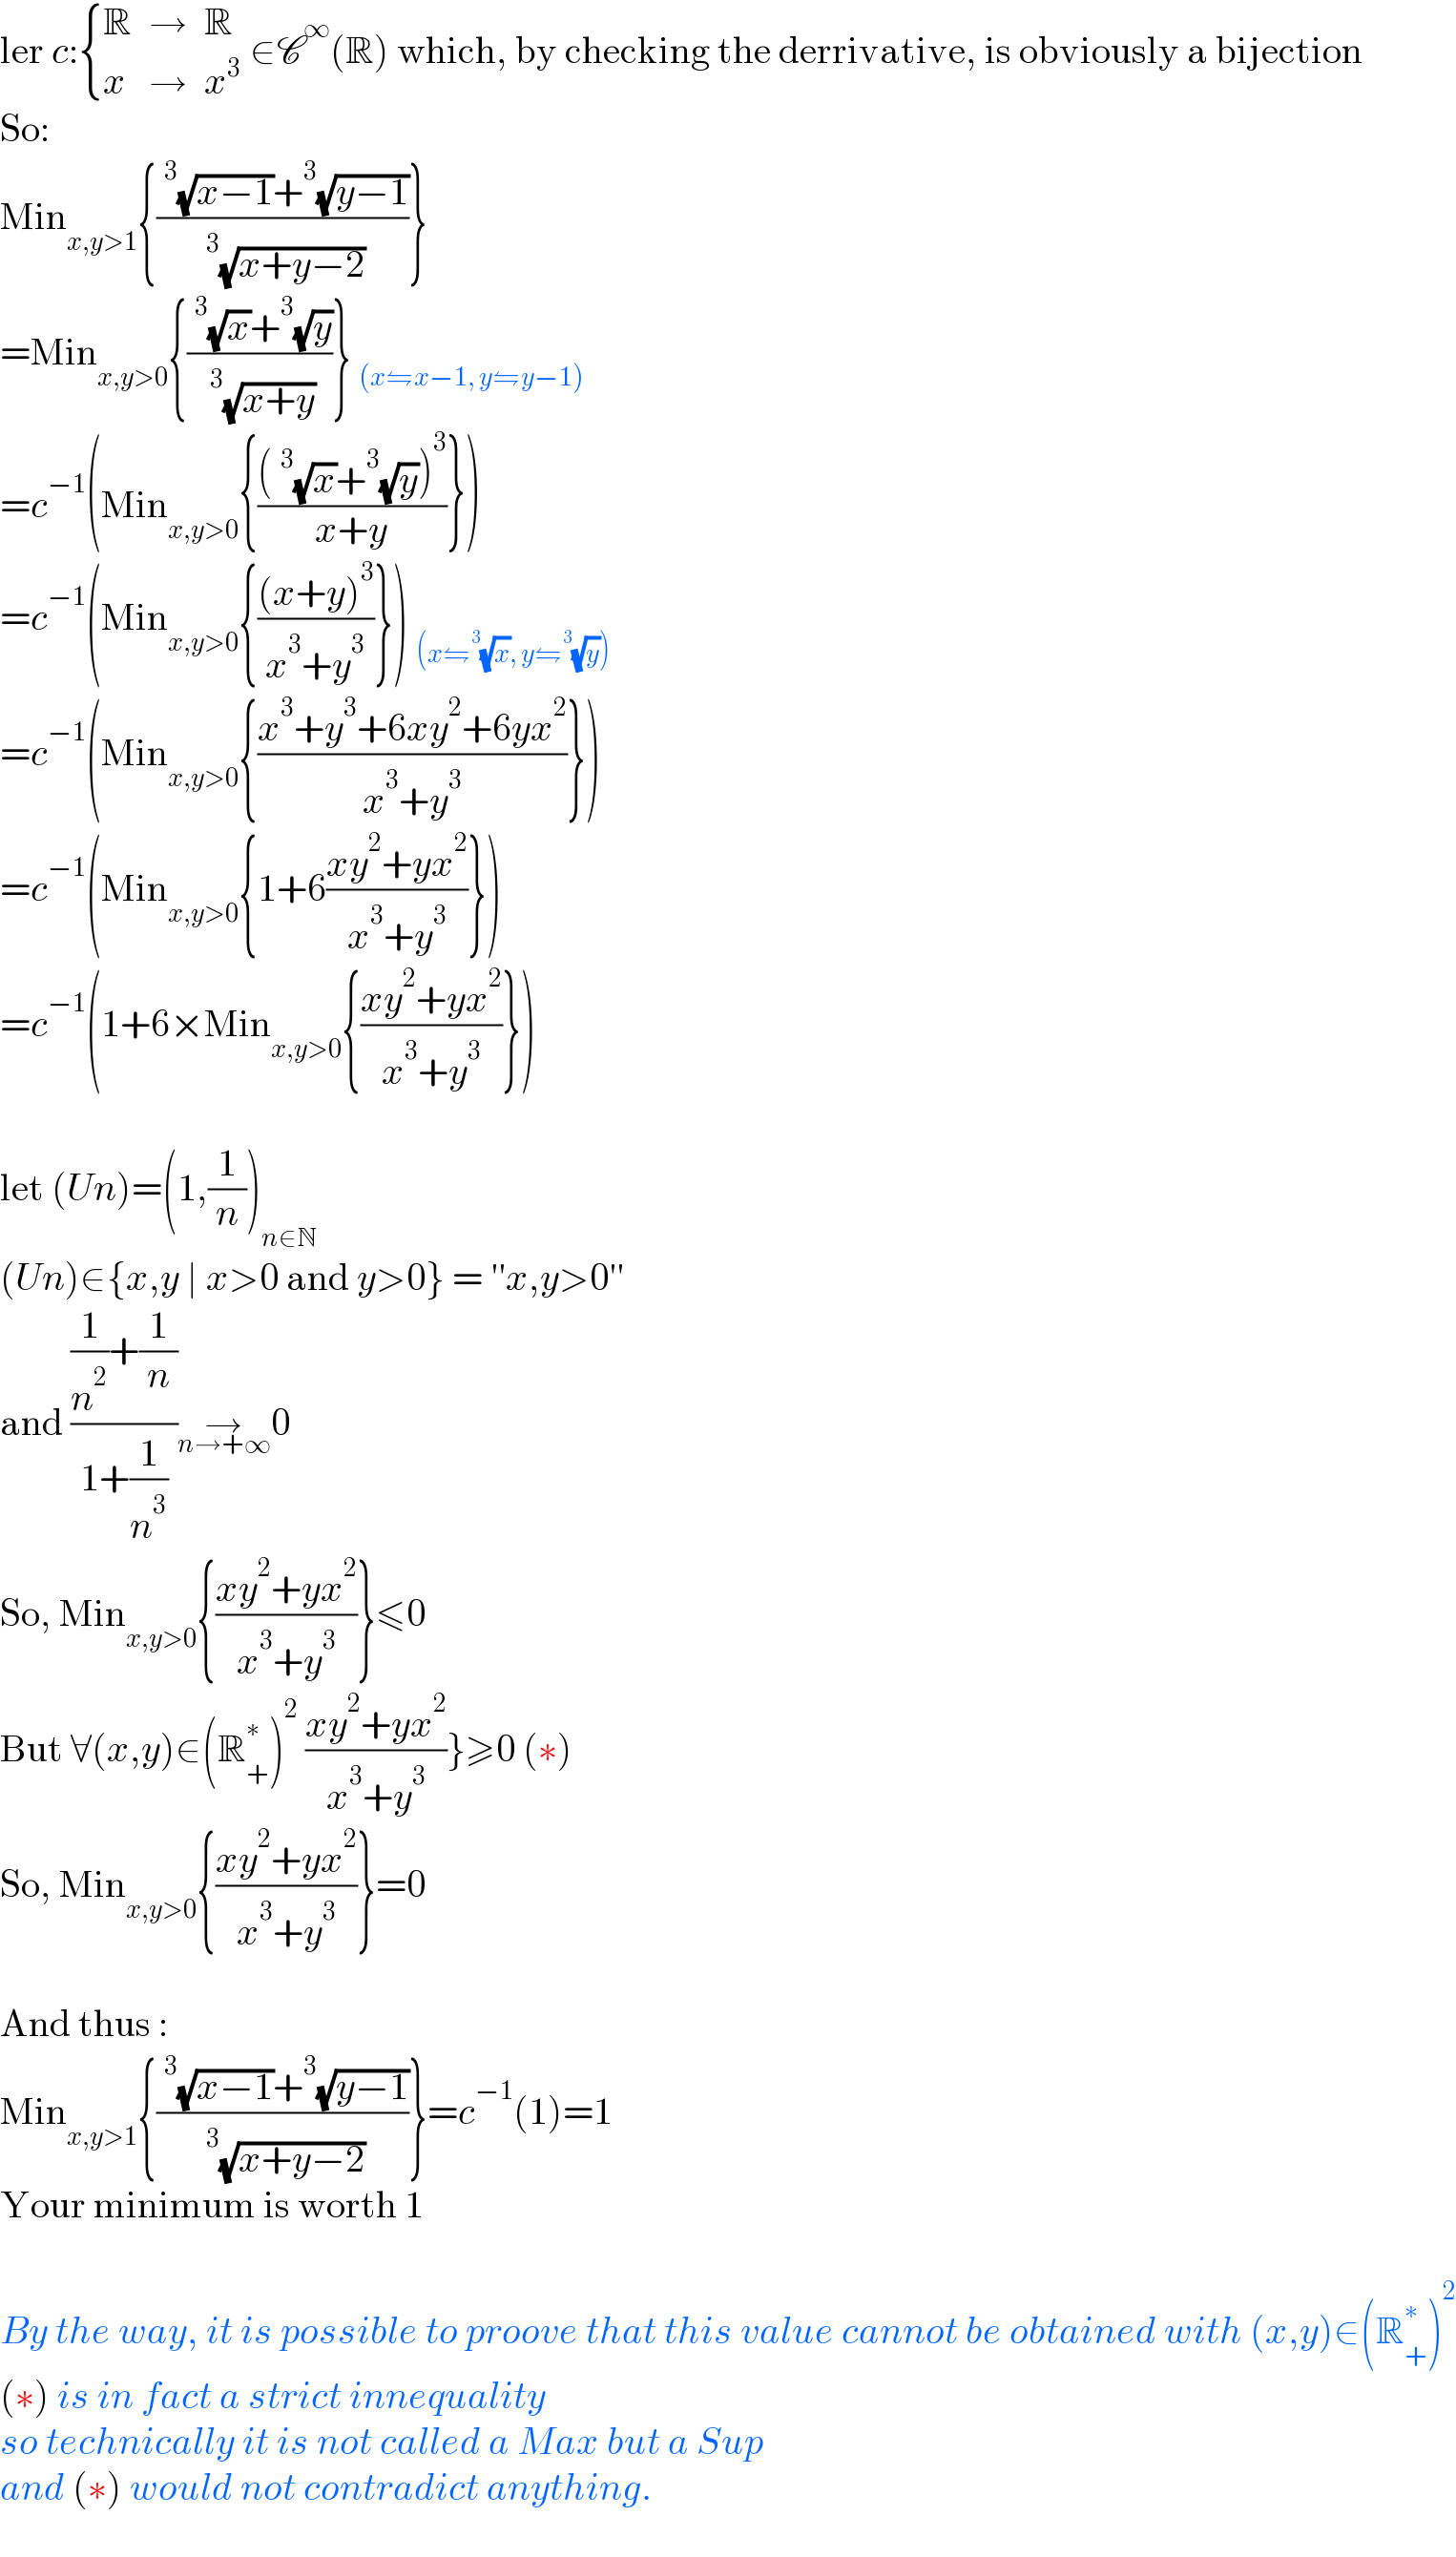 ler c: { (R,→,R),(x,→,x^3 ) :} ∈C^∞ (R) which, by checking the derrivative, is obviously a bijection  So:  Min_(x,y>1) {((^3 (√(x−1))+^3 (√(y−1)))/(^3 (√(x+y−2))))}  =Min_(x,y>0) {((^3 (√x)+^3 (√y))/(^3 (√(x+y))))} _((x⇋x−1, y⇋y−1))   =c^(−1) (Min_(x,y>0) {(((^3 (√x)+^3 (√y))^3 )/(x+y))})   =c^(−1) (Min_(x,y>0) {(((x+y)^3 )/(x^3 +y^3 ))}) _((x⇋^3 (√x), y⇋^3 (√y)))   =c^(−1) (Min_(x,y>0) {((x^3 +y^3 +6xy^2 +6yx^2 )/(x^3 +y^3 ))})  =c^(−1) (Min_(x,y>0) {1+6((xy^2 +yx^2 )/(x^3 +y^3 ))})  =c^(−1) (1+6×Min_(x,y>0) {((xy^2 +yx^2 )/(x^3 +y^3 ))})    let (Un)=(1,(1/n))_(n∈N)   (Un)∈{x,y ∣ x>0 and y>0} = ′′x,y>0′′  and (((1/n^2 )+(1/n))/(1+(1/n^3 )))→_(n→+∞) 0  So, Min_(x,y>0) {((xy^2 +yx^2 )/(x^3 +y^3 ))}≤0  But ∀(x,y)∈(R_+ ^∗ )^2  ((xy^2 +yx^2 )/(x^3 +y^3 ))}≥0 (∗)  So, Min_(x,y>0) {((xy^2 +yx^2 )/(x^3 +y^3 ))}=0    And thus :  Min_(x,y>1) {((^3 (√(x−1))+^3 (√(y−1)))/(^3 (√(x+y−2))))}=c^(−1) (1)=1  Your minimum is worth 1    By the way, it is possible to proove that this value cannot be obtained with (x,y)∈(R_+ ^∗ )^2   (∗) is in fact a strict innequality  so technically it is not called a Max but a Sup  and (∗) would not contradict anything.    